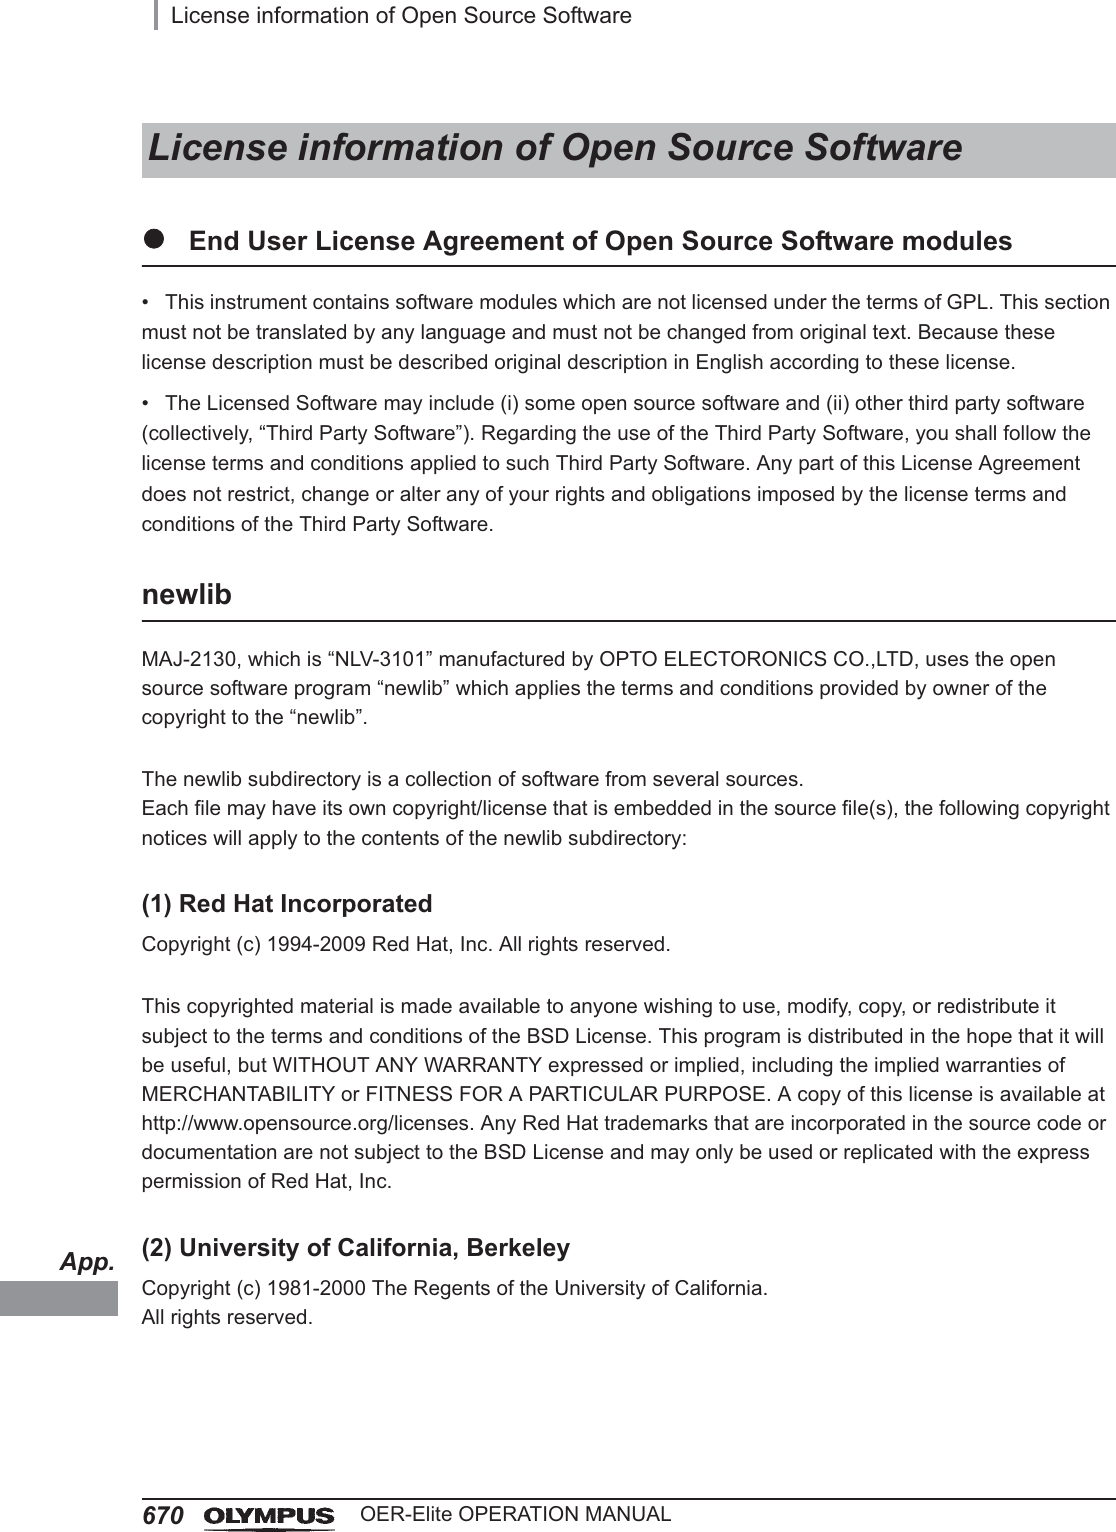 App.670License information of Open Source SoftwareOER-Elite OPERATION MANUALzEnd User License Agreement of Open Source Software modules• This instrument contains software modules which are not licensed under the terms of GPL. This section must not be translated by any language and must not be changed from original text. Because these license description must be described original description in English according to these license.• The Licensed Software may include (i) some open source software and (ii) other third party software (collectively, “Third Party Software”). Regarding the use of the Third Party Software, you shall follow the license terms and conditions applied to such Third Party Software. Any part of this License Agreement does not restrict, change or alter any of your rights and obligations imposed by the license terms and conditions of the Third Party Software.newlibMAJ-2130, which is “NLV-3101” manufactured by OPTO ELECTORONICS CO.,LTD, uses the open source software program “newlib” which applies the terms and conditions provided by owner of the copyright to the “newlib”.The newlib subdirectory is a collection of software from several sources.Each file may have its own copyright/license that is embedded in the source file(s), the following copyright notices will apply to the contents of the newlib subdirectory:(1) Red Hat IncorporatedCopyright (c) 1994-2009 Red Hat, Inc. All rights reserved.This copyrighted material is made available to anyone wishing to use, modify, copy, or redistribute it subject to the terms and conditions of the BSD License. This program is distributed in the hope that it will be useful, but WITHOUT ANY WARRANTY expressed or implied, including the implied warranties of MERCHANTABILITY or FITNESS FOR A PARTICULAR PURPOSE. A copy of this license is available at http://www.opensource.org/licenses. Any Red Hat trademarks that are incorporated in the source code or documentation are not subject to the BSD License and may only be used or replicated with the express permission of Red Hat, Inc.(2) University of California, BerkeleyCopyright (c) 1981-2000 The Regents of the University of California.All rights reserved.License information of Open Source Software